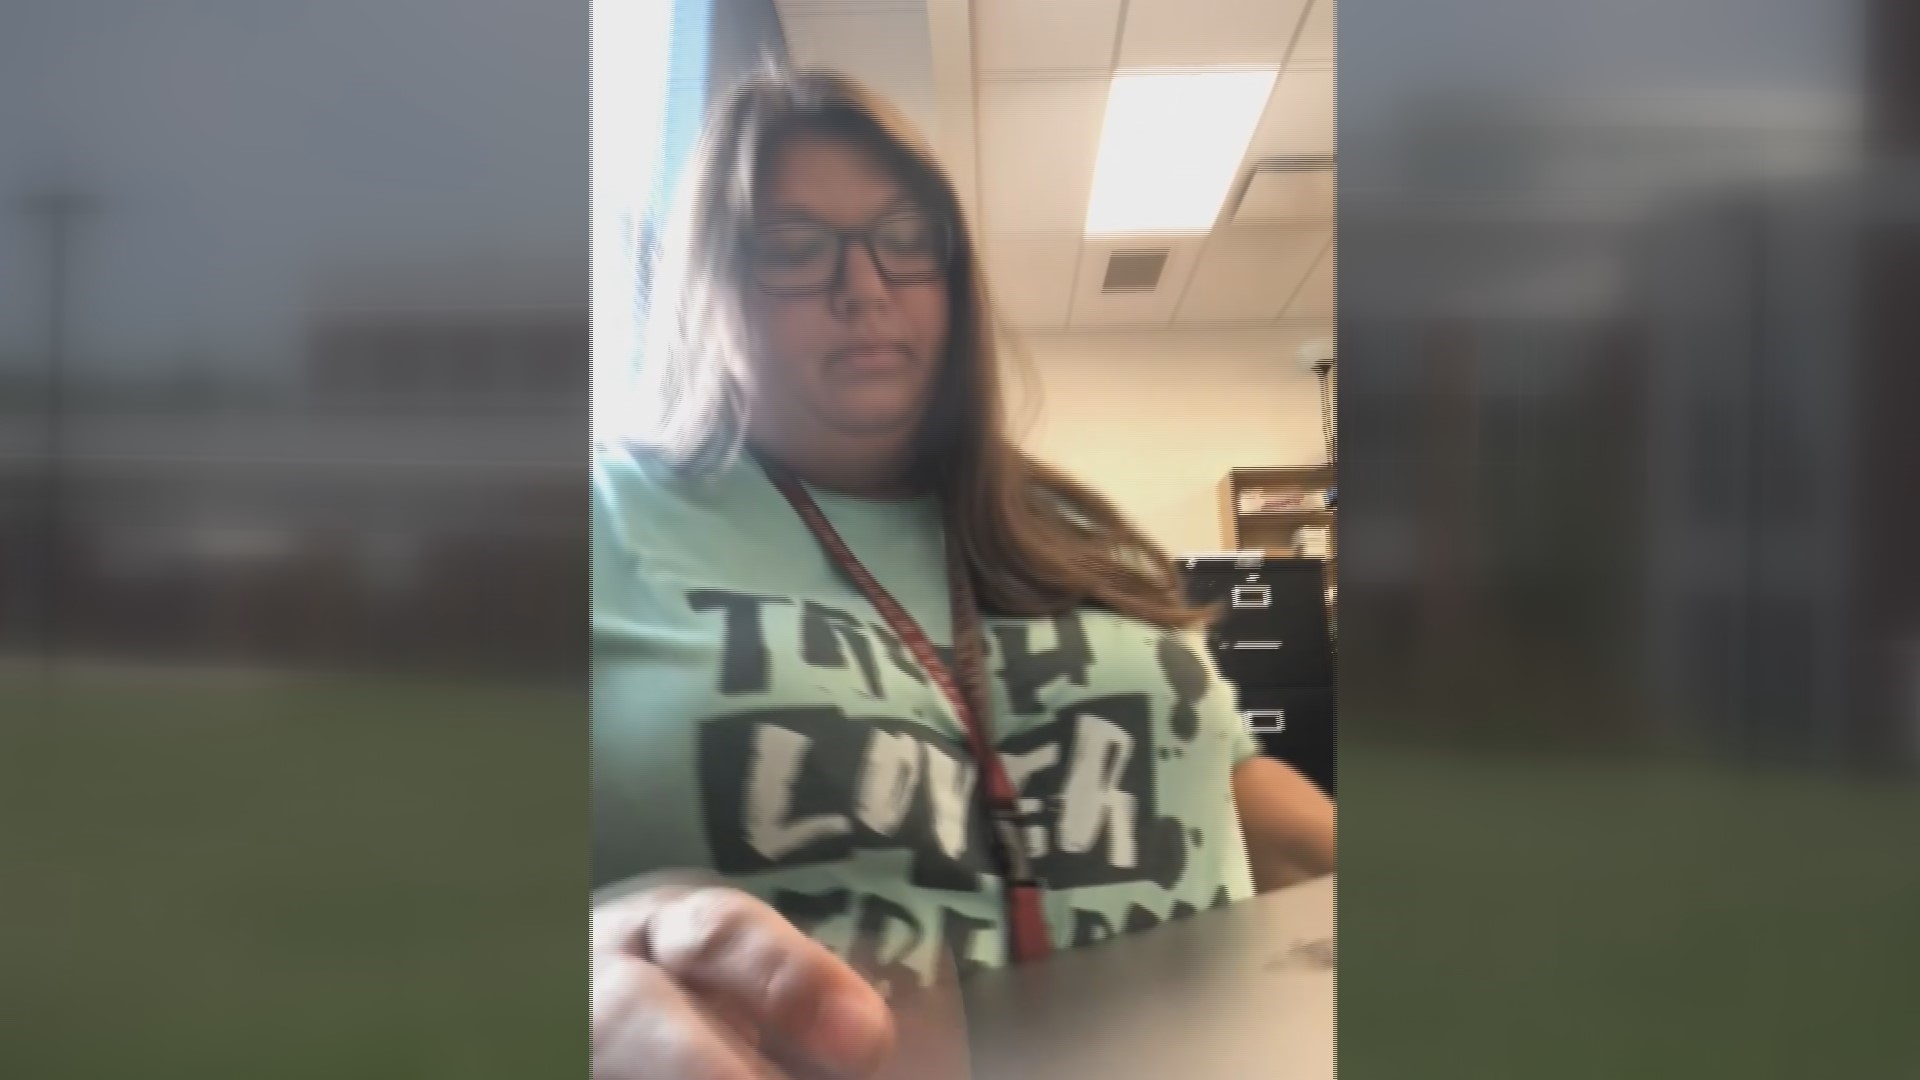 Angela Harders posted videos of her being placed on administrative leave for violating the MCPS mandatory mask policy